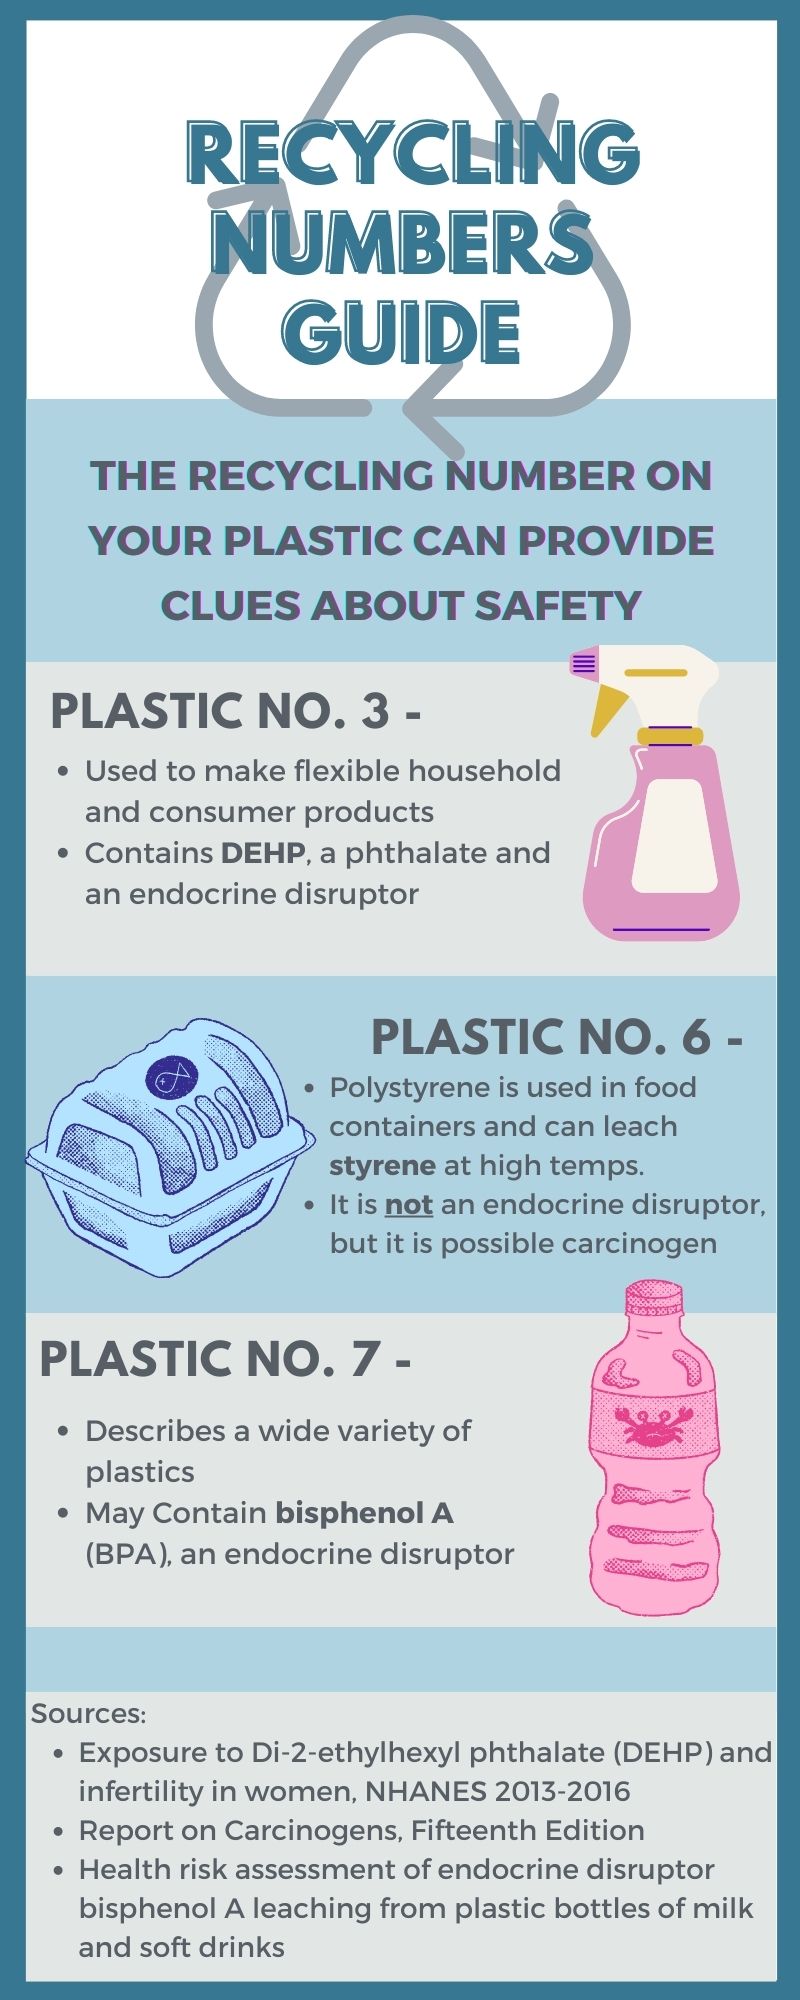 An infographic showing three different plastic recycling numbers. It compares their uses and the types of chemicals they may contain.